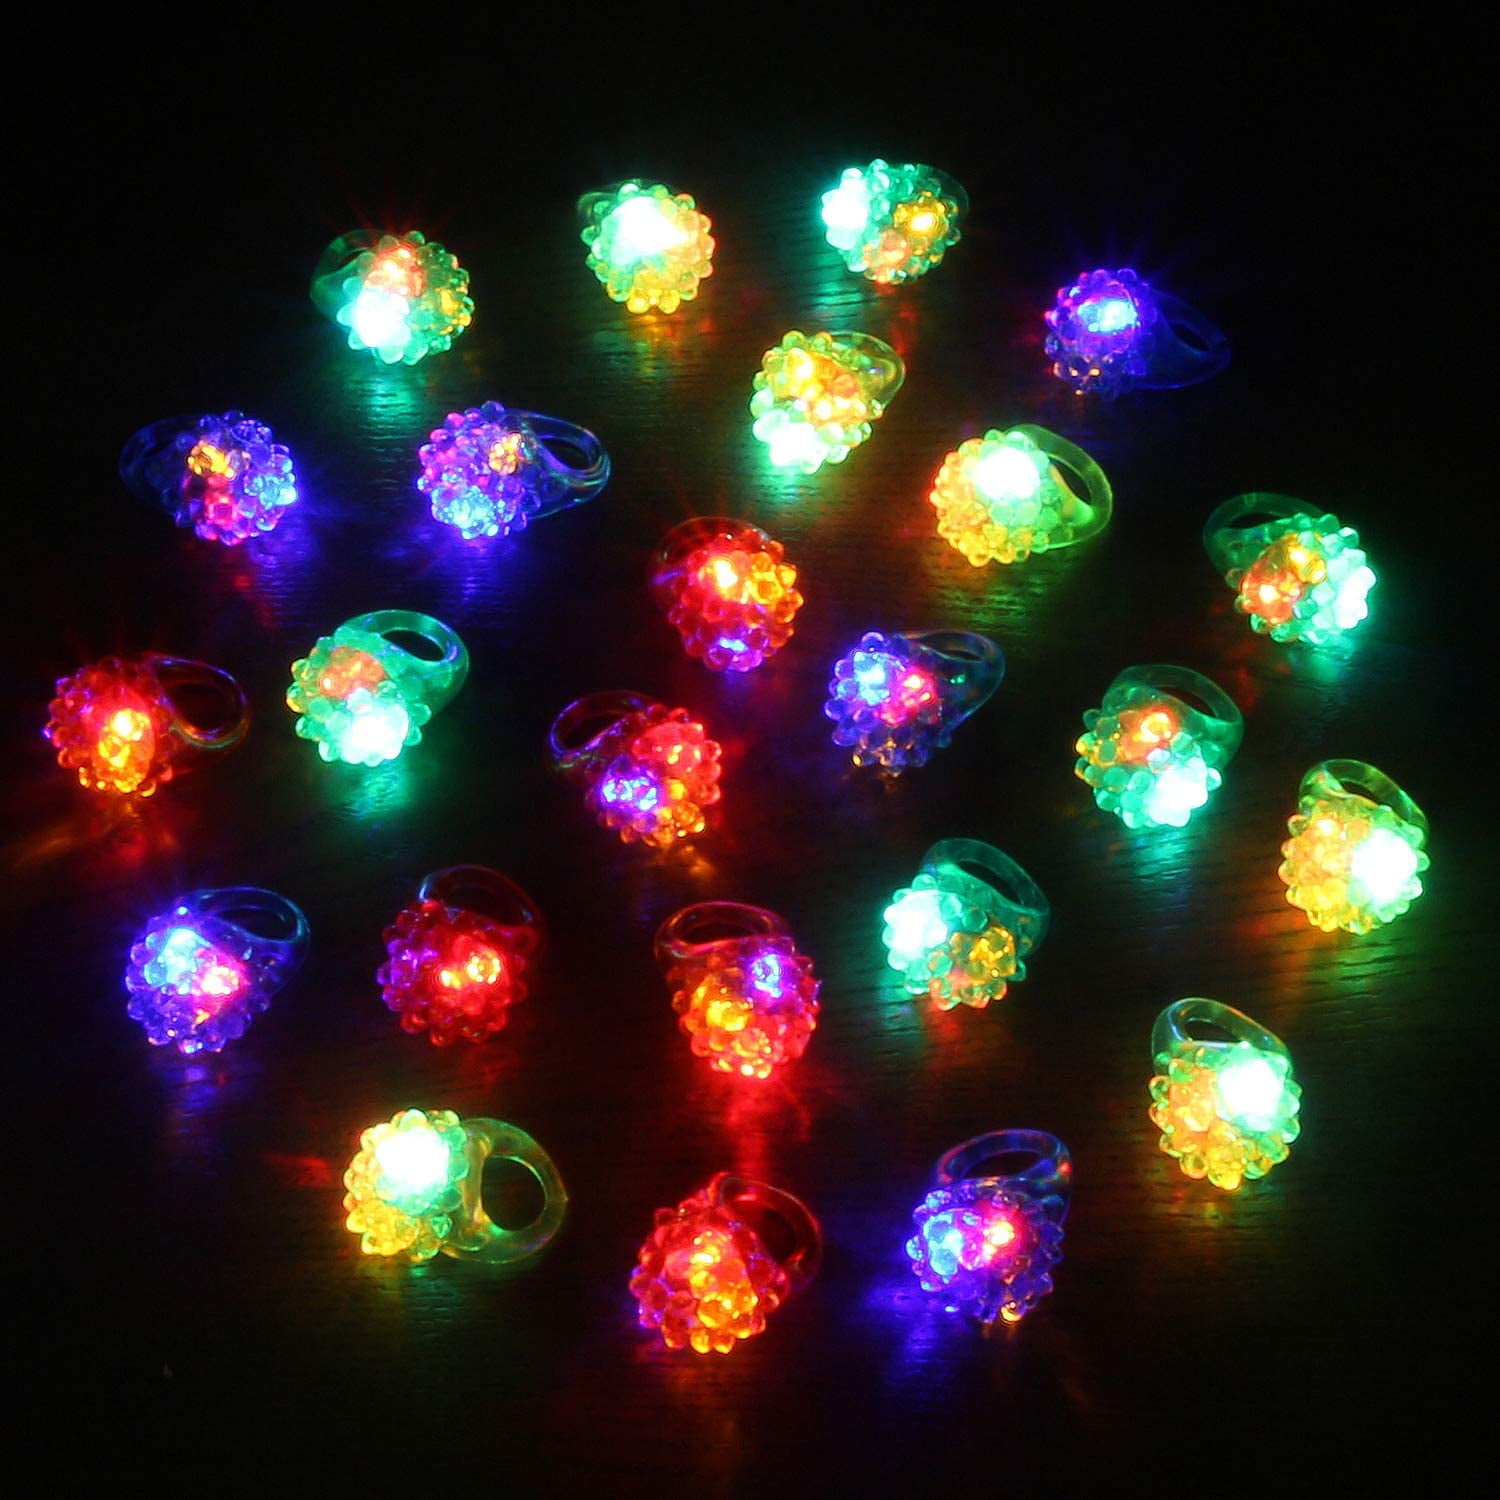 12 LED FLASHING WHITE LIGHT UP BUMPY RINGS FROZEN SNOW JELLY RING CARNIVAL PRIZE 